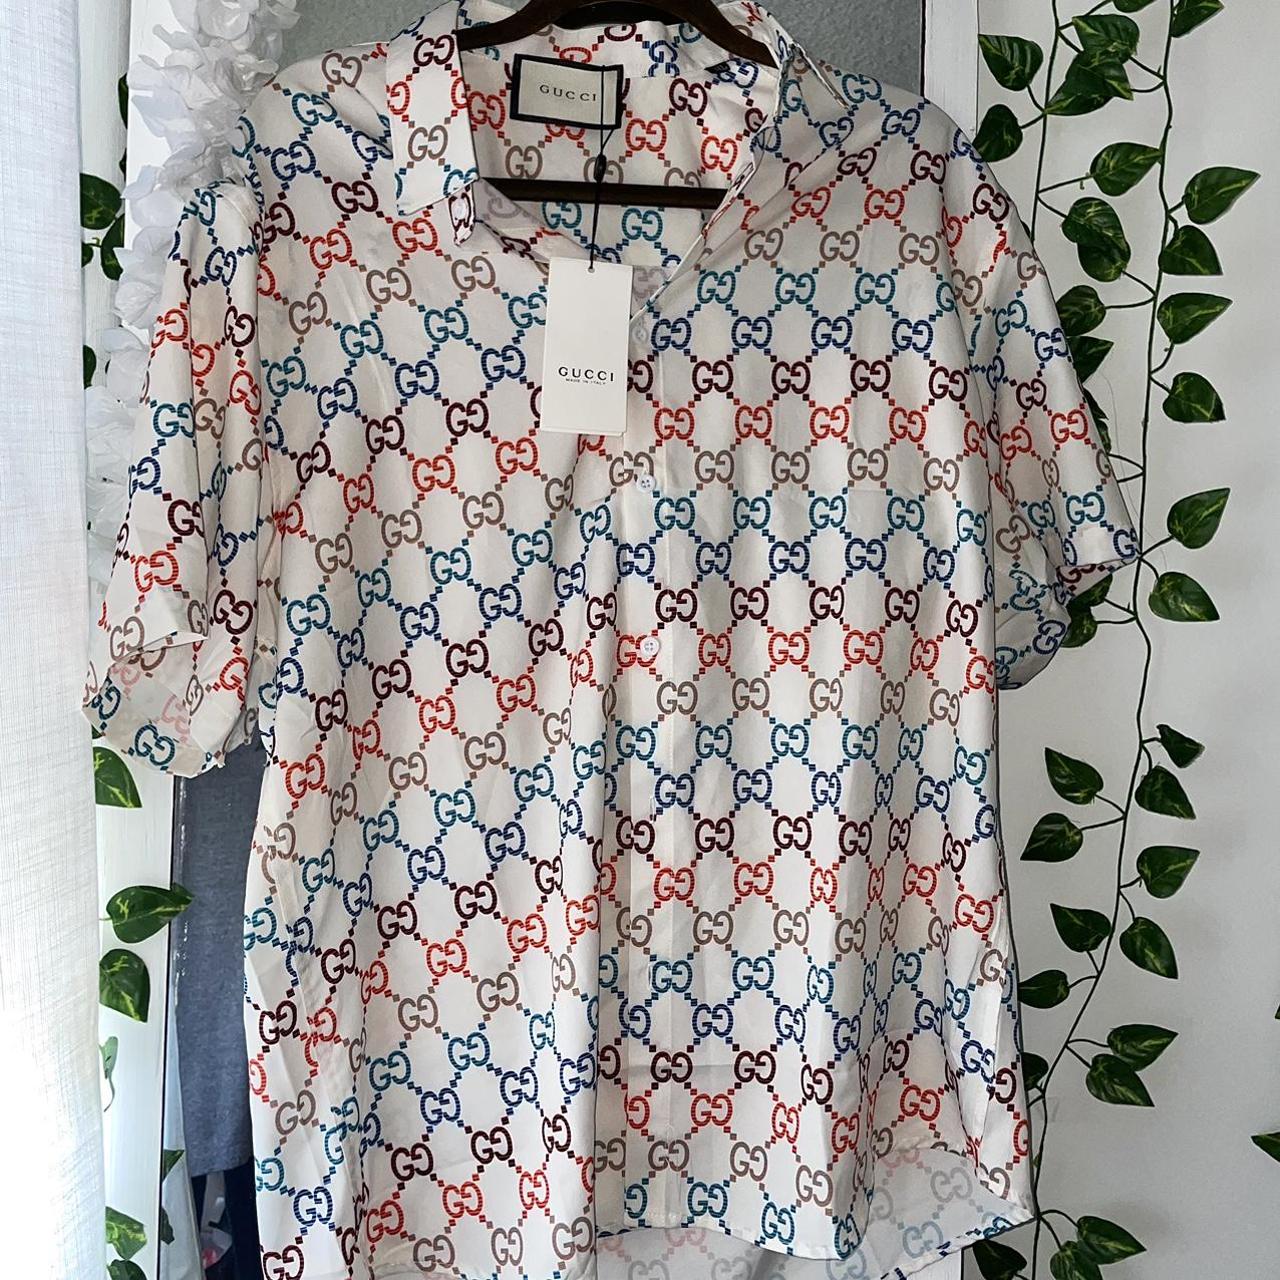 Gucci GG Polo Short Sleeve Shirt (Mens) for Sale in Bloomfield, NJ - OfferUp